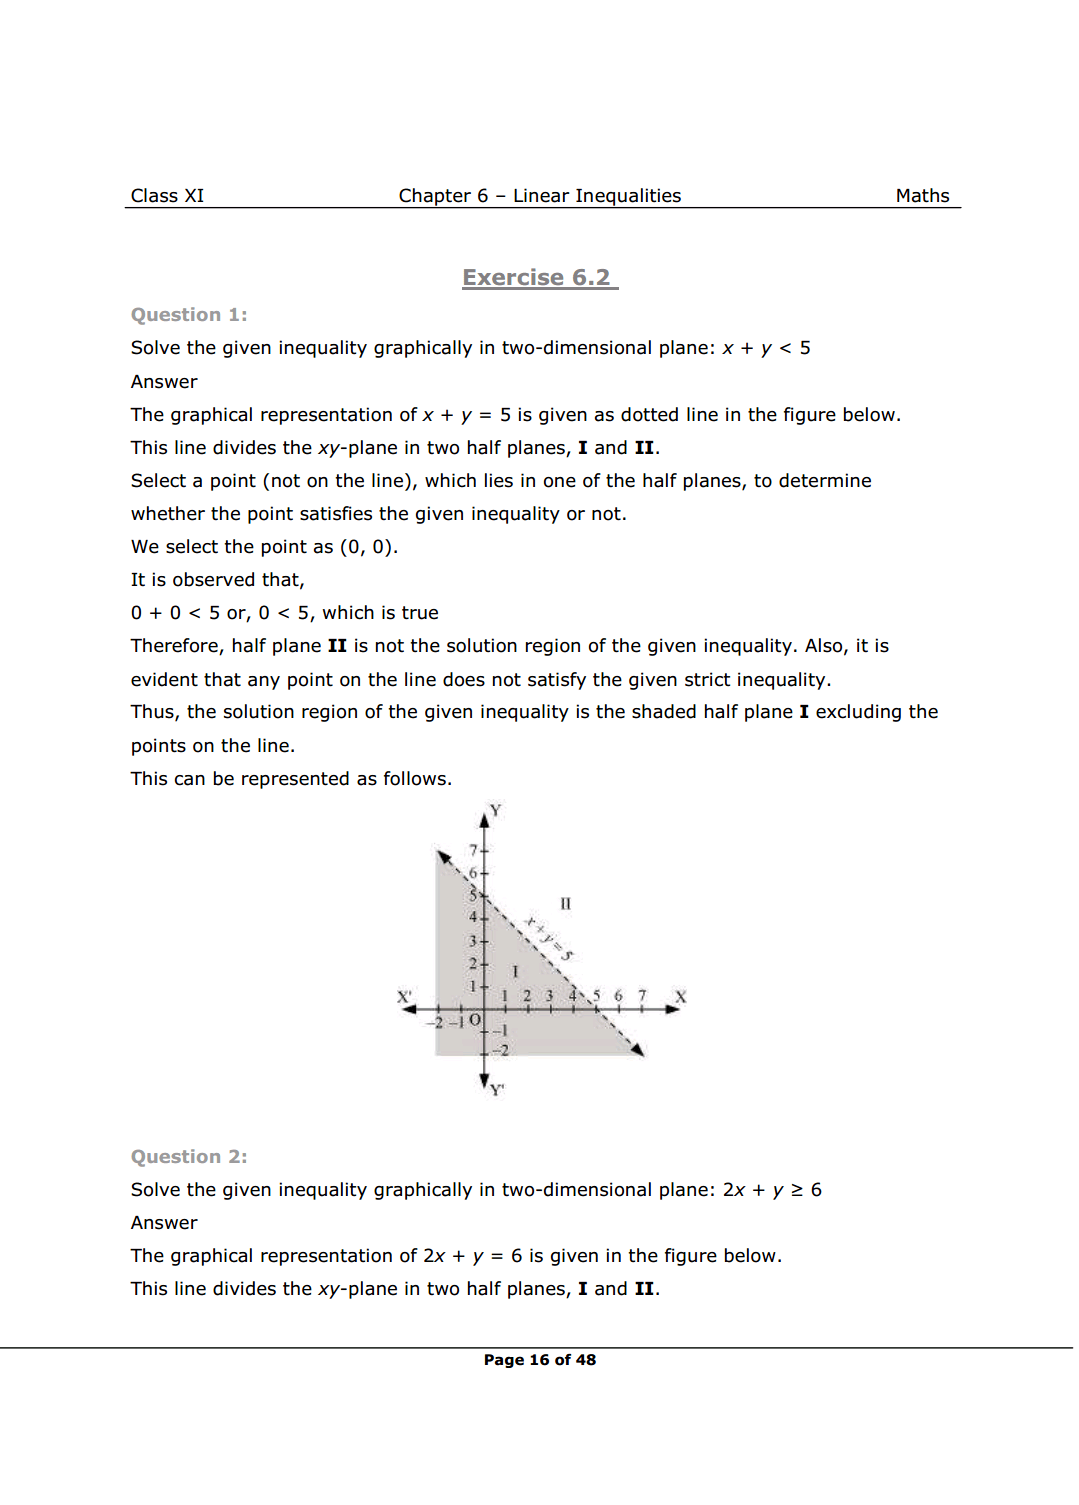 Class 11 Maths Chapter 6 Exercise 6.2 Solutions image 1